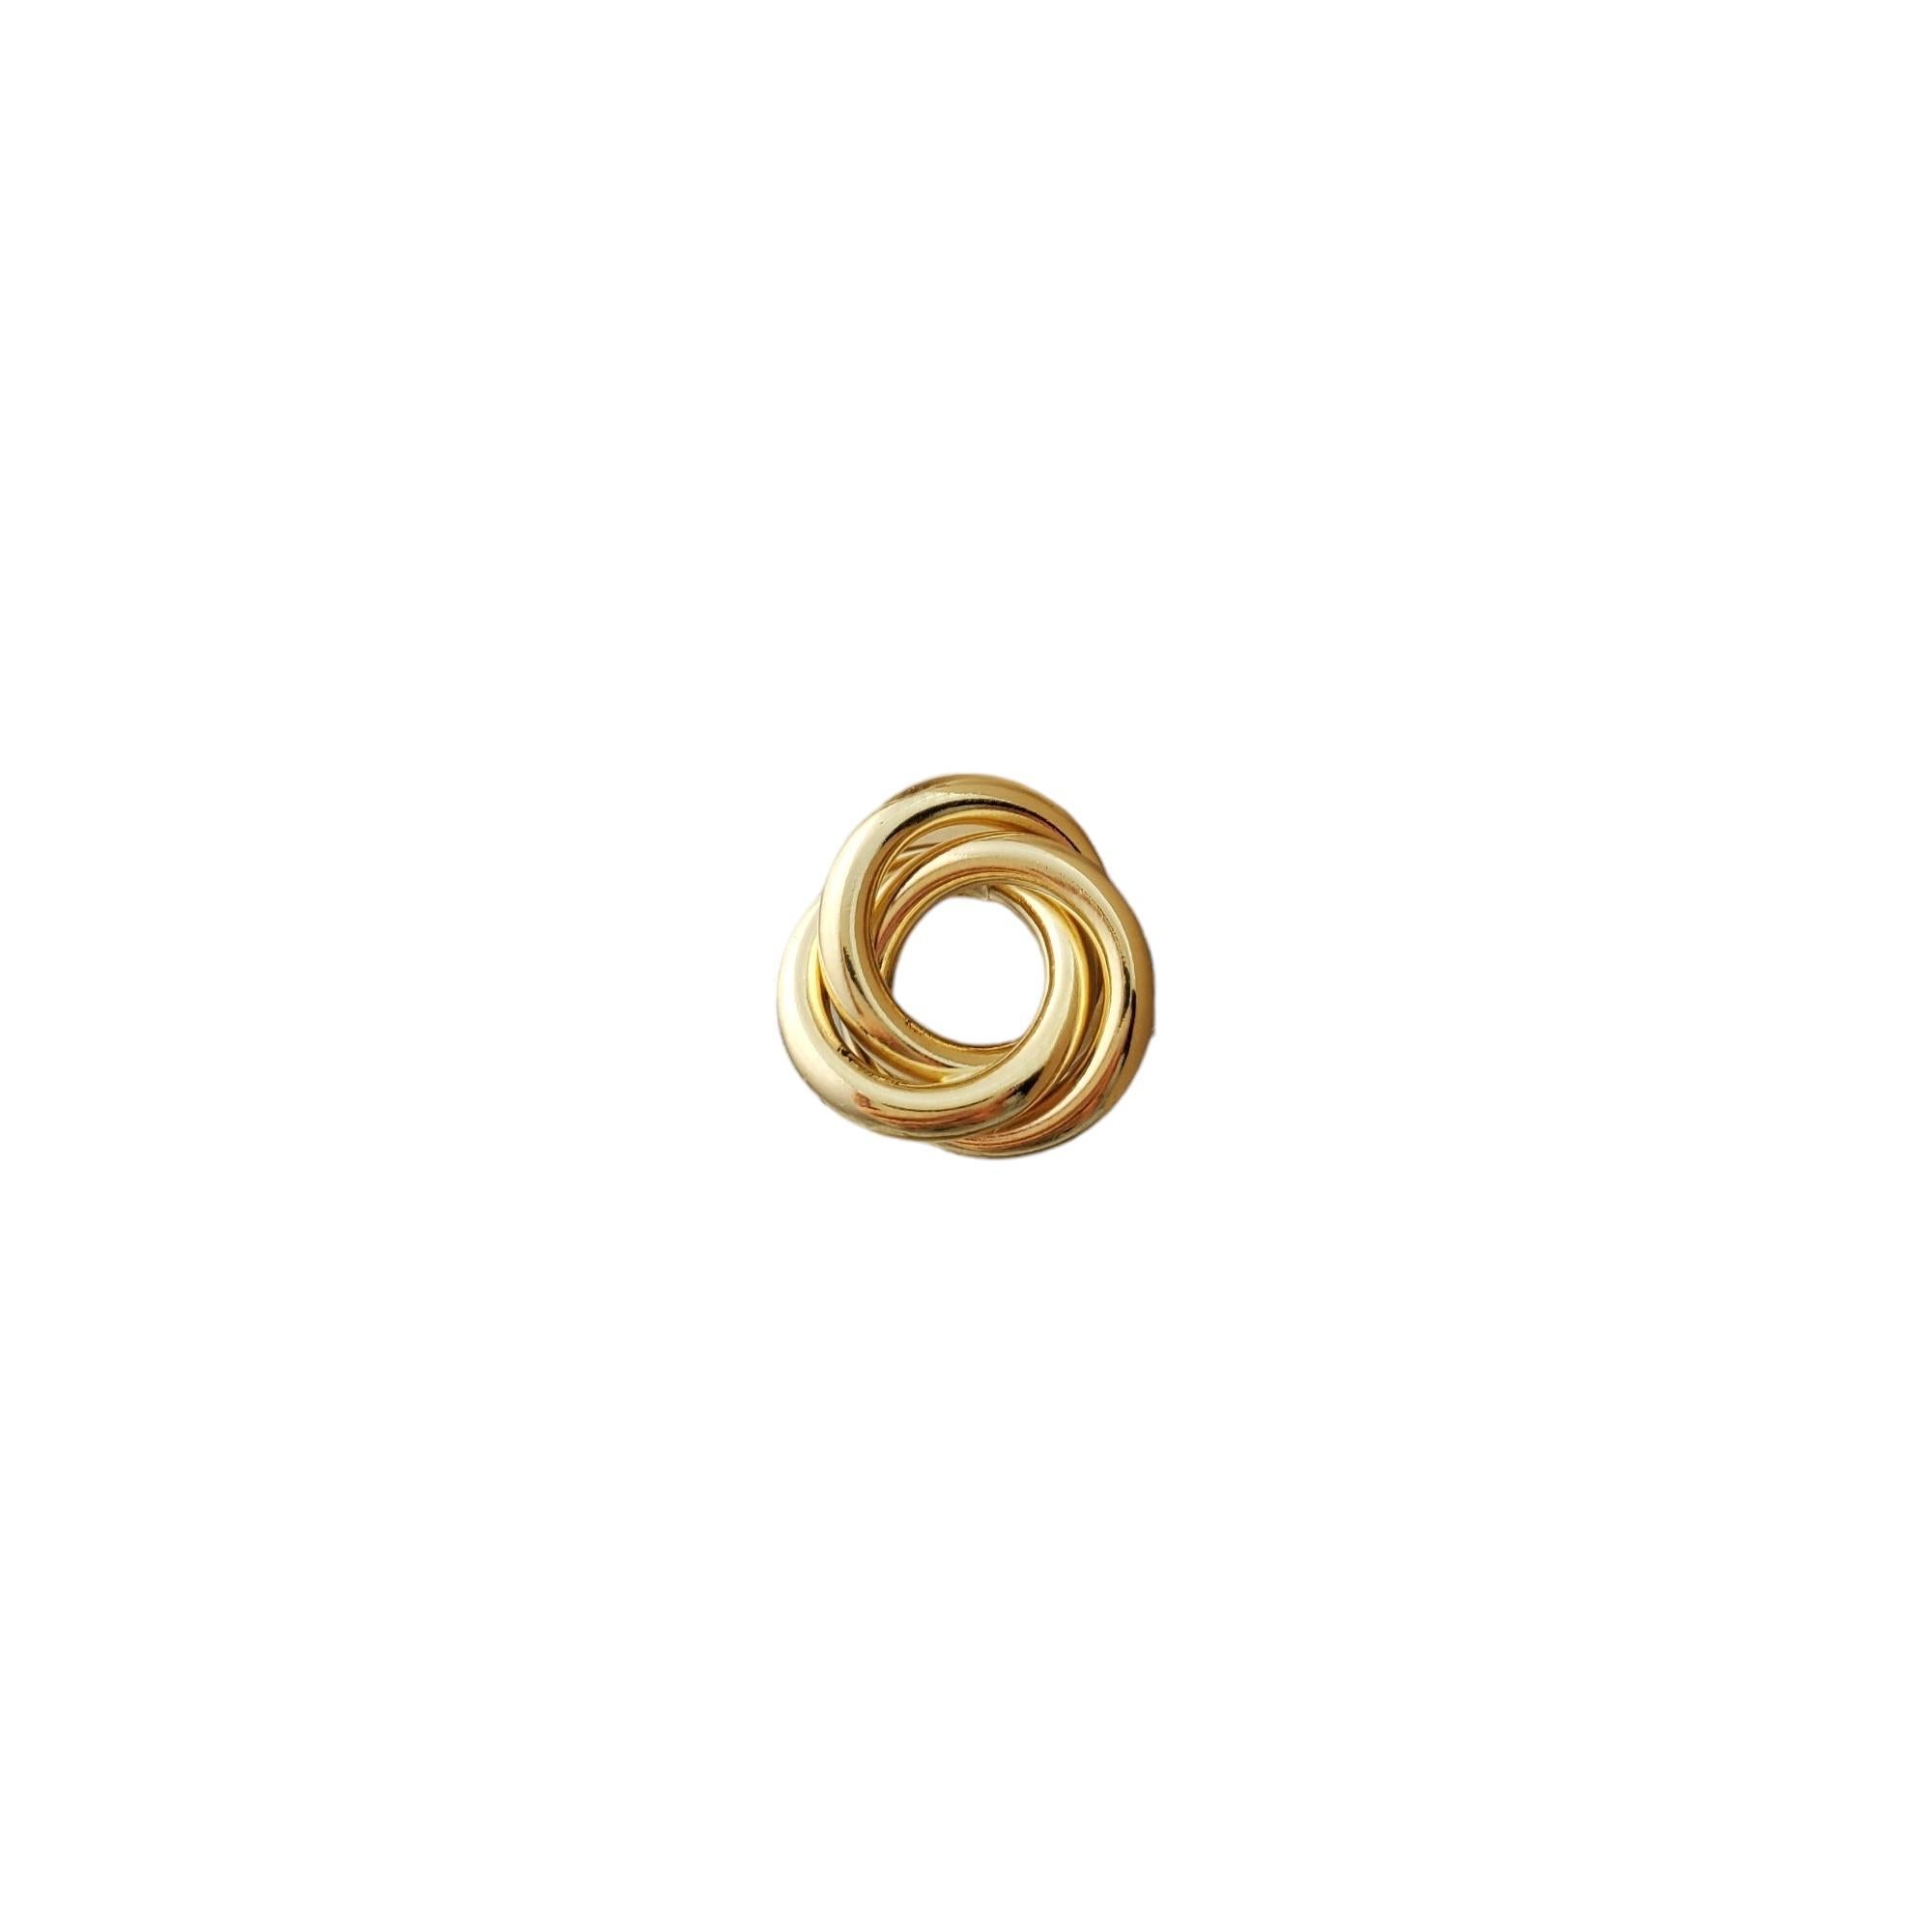 Vintage 14K Yellow Gold Twist Earrings -

These captivating earrings feature intertwined links that are a stunning addition to any outfit. 

Weight: 1.6 dwt/ 2.3 g

Size: 12.1 mm X 12.82 mm

Hallmark: 14K

Very good condition, professionally